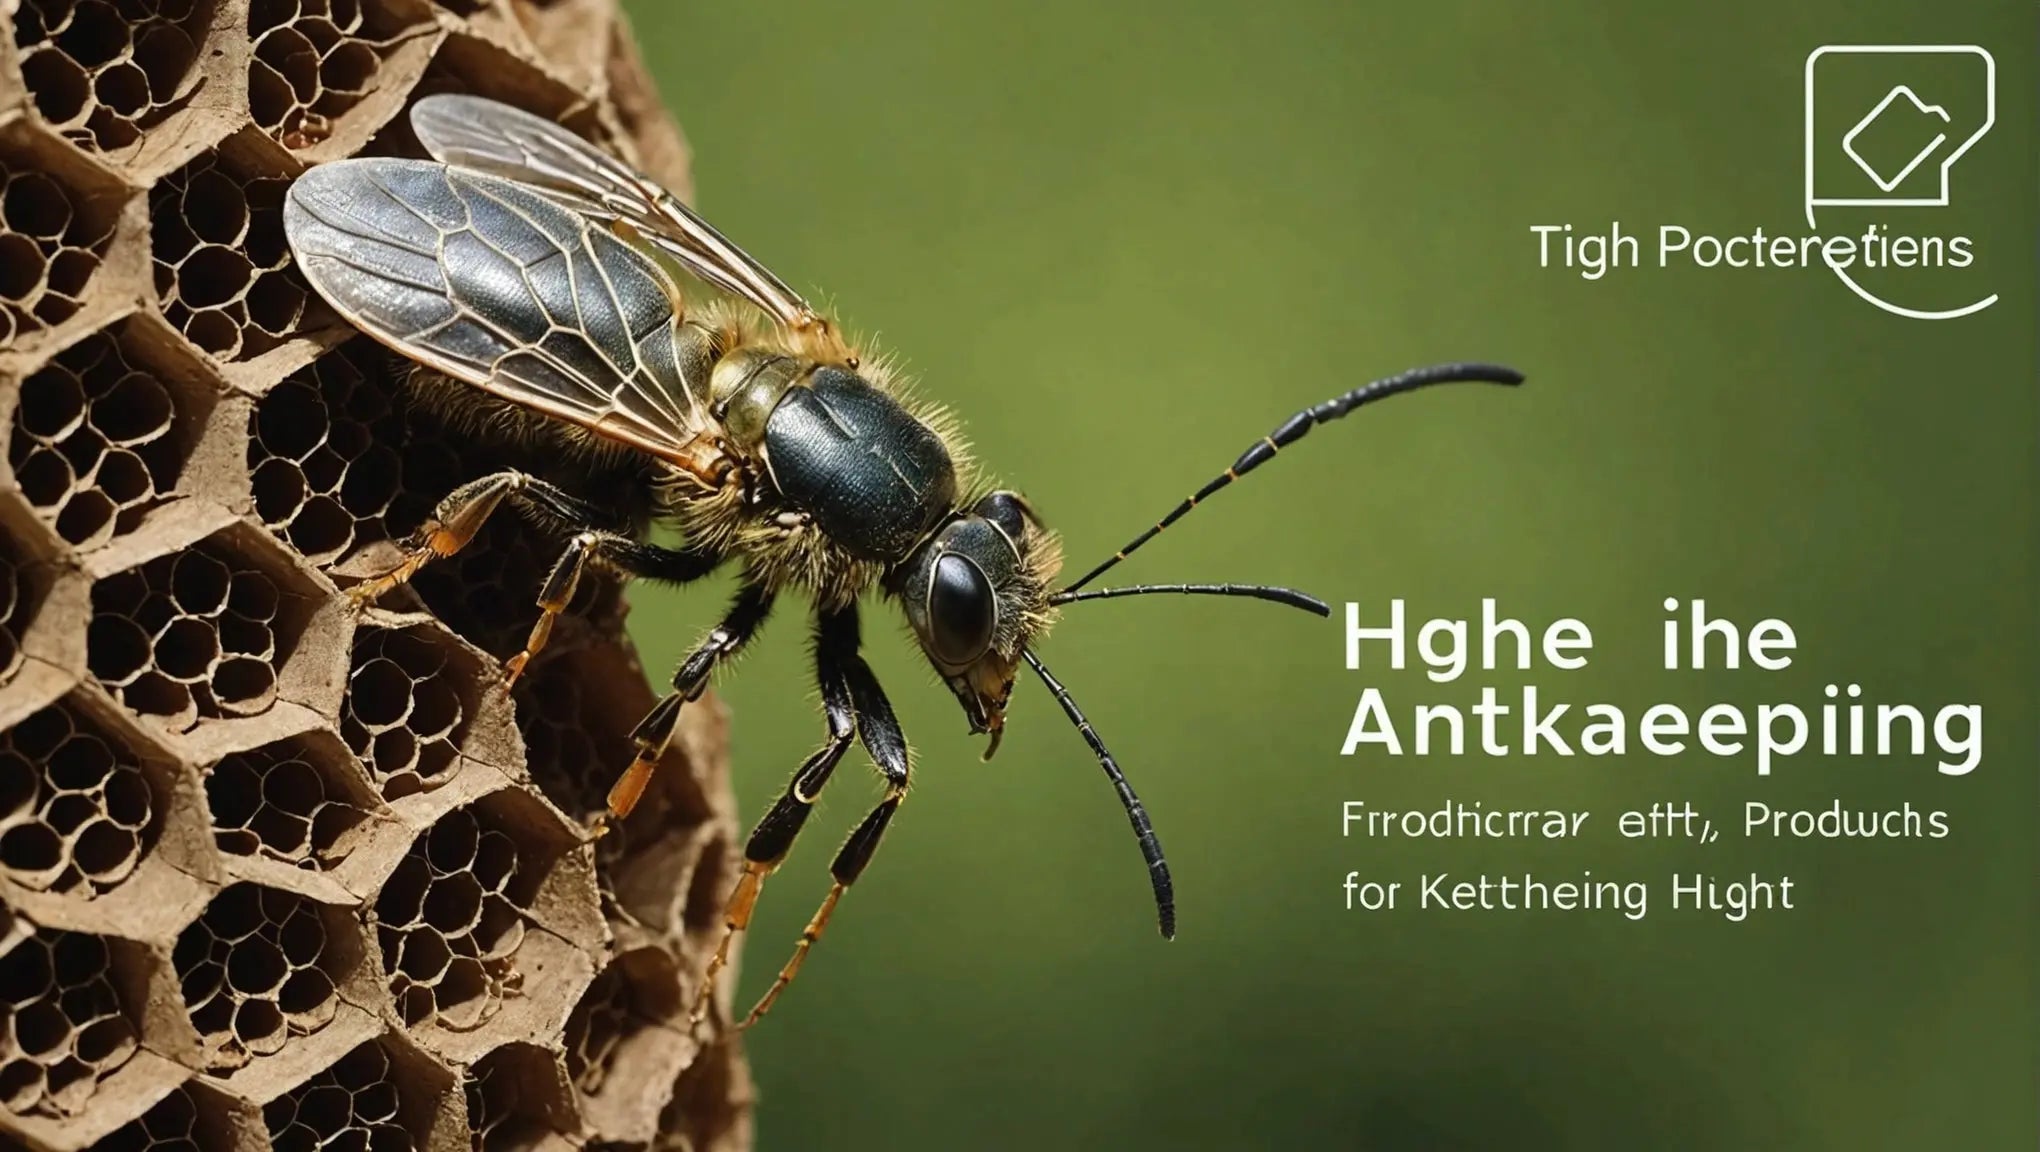 Discover the High-Quality Products for Antkeeping